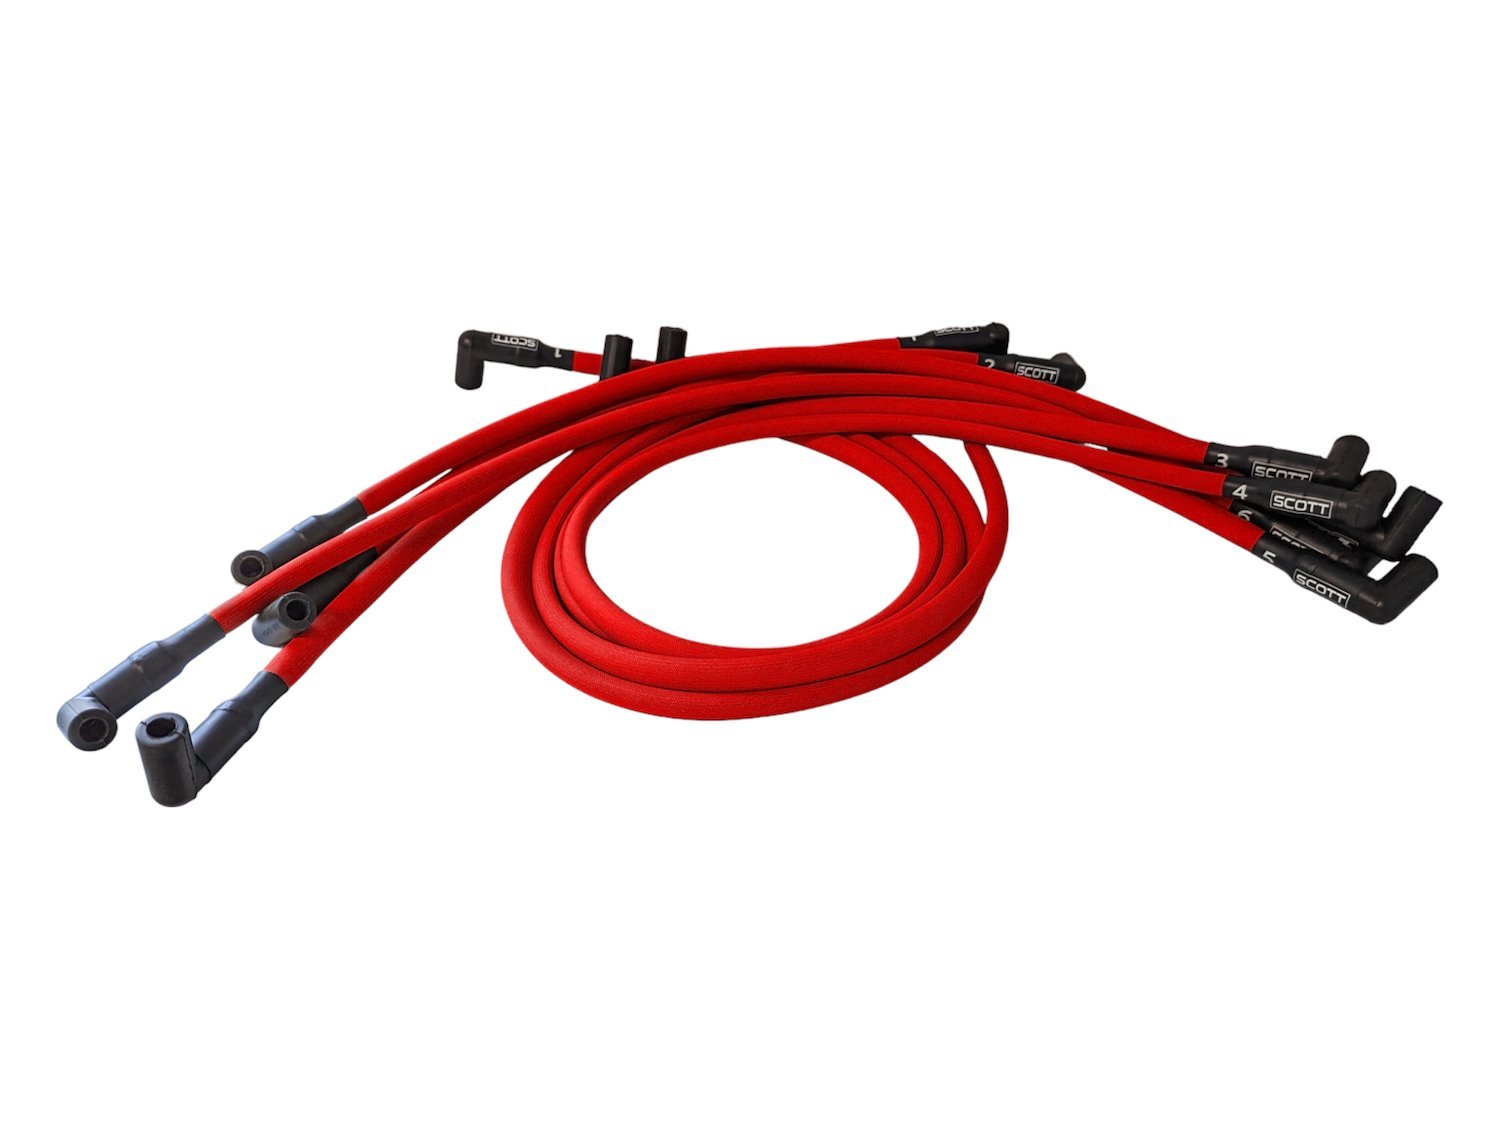 SPW-PS-407-2 High-Performance Fiberglass-Oversleeved Spark Plug Wire Set for Small Block Chevy, Under Header [Red]